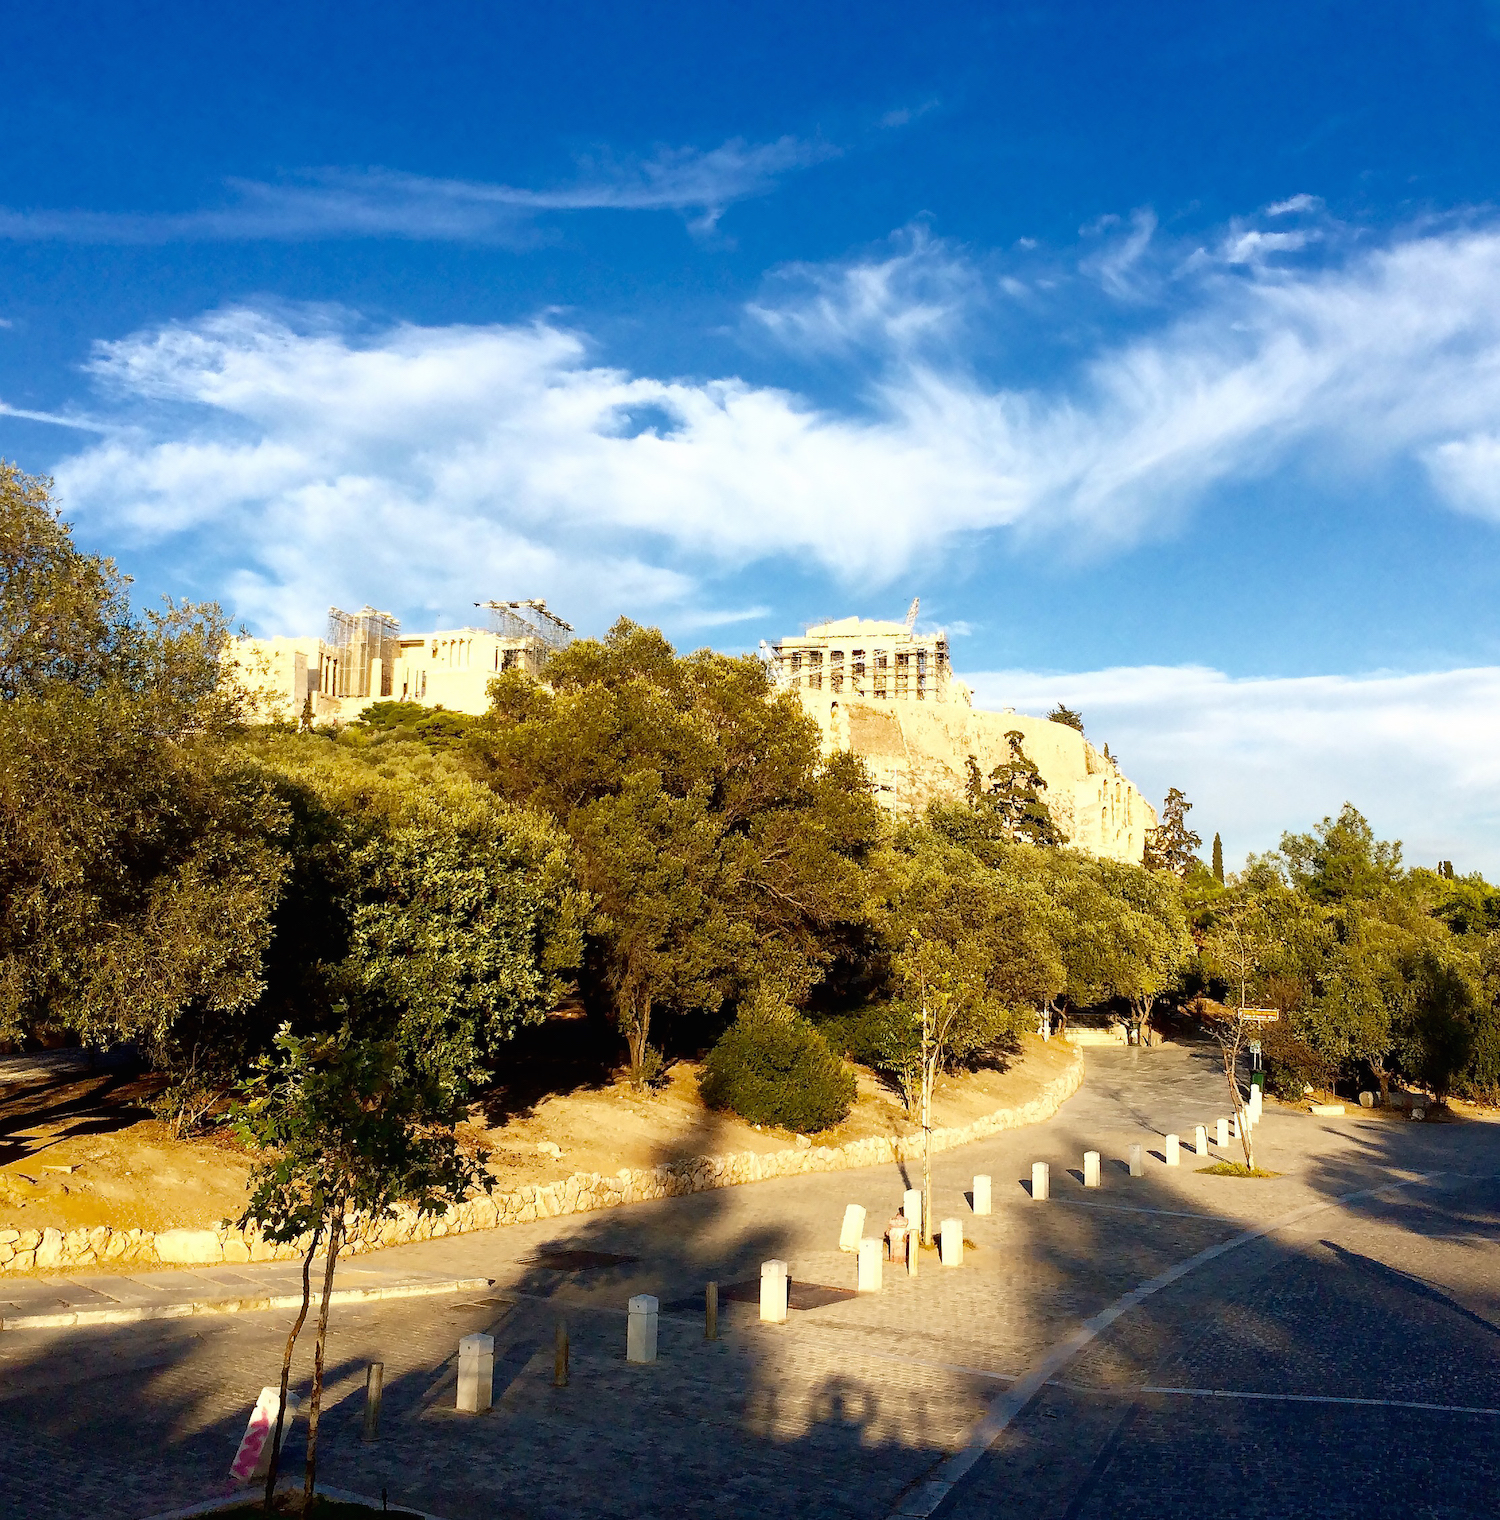 Checked off of Clements’ bucket list was “taking Acropolis Hill in Athens, Greece.” The Acropolis is an ancient citadel located high above the city and contains the remains of several ancient buildings.